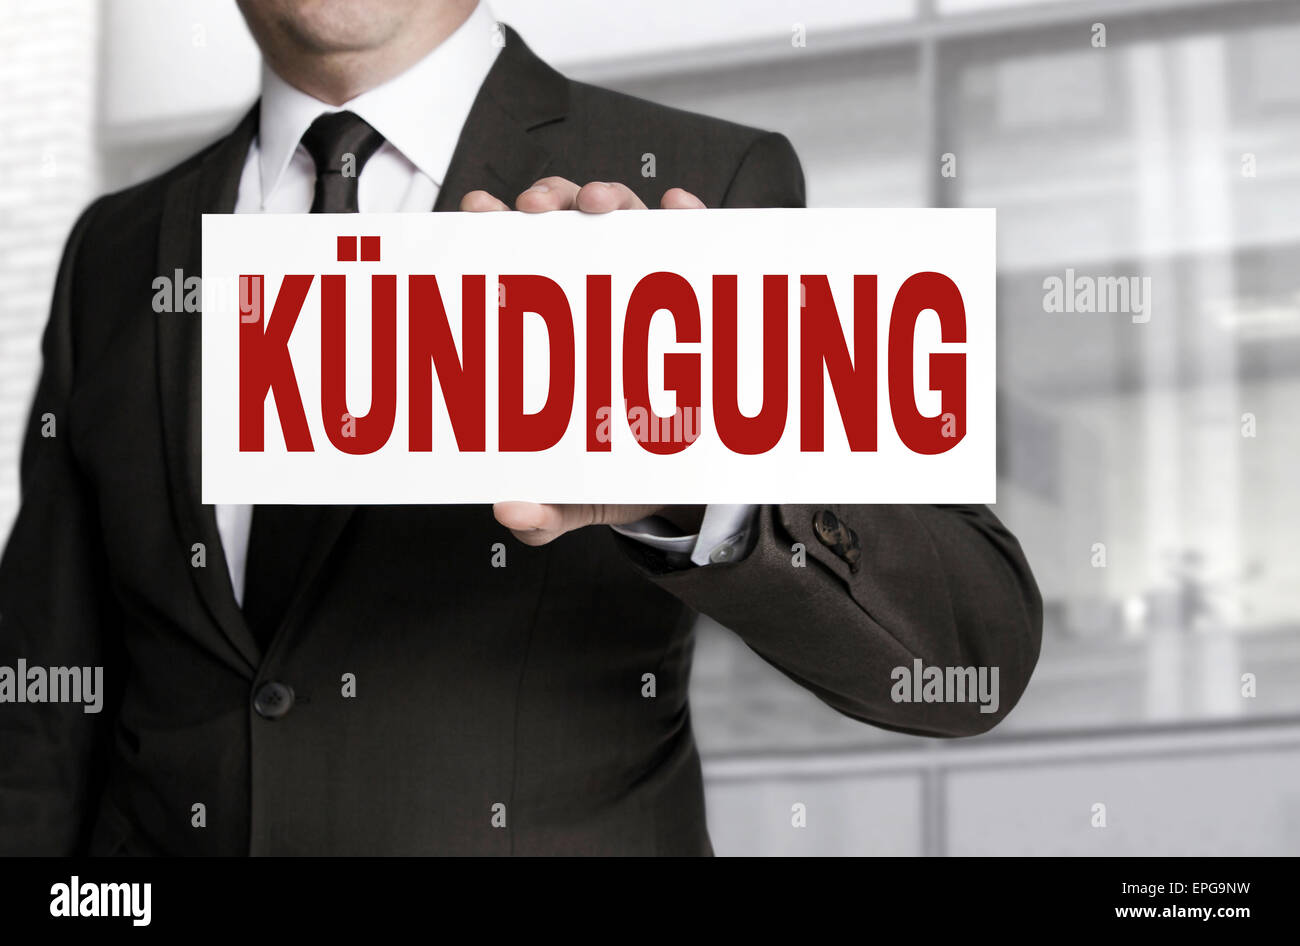 termination sign held by businessman Stock Photo